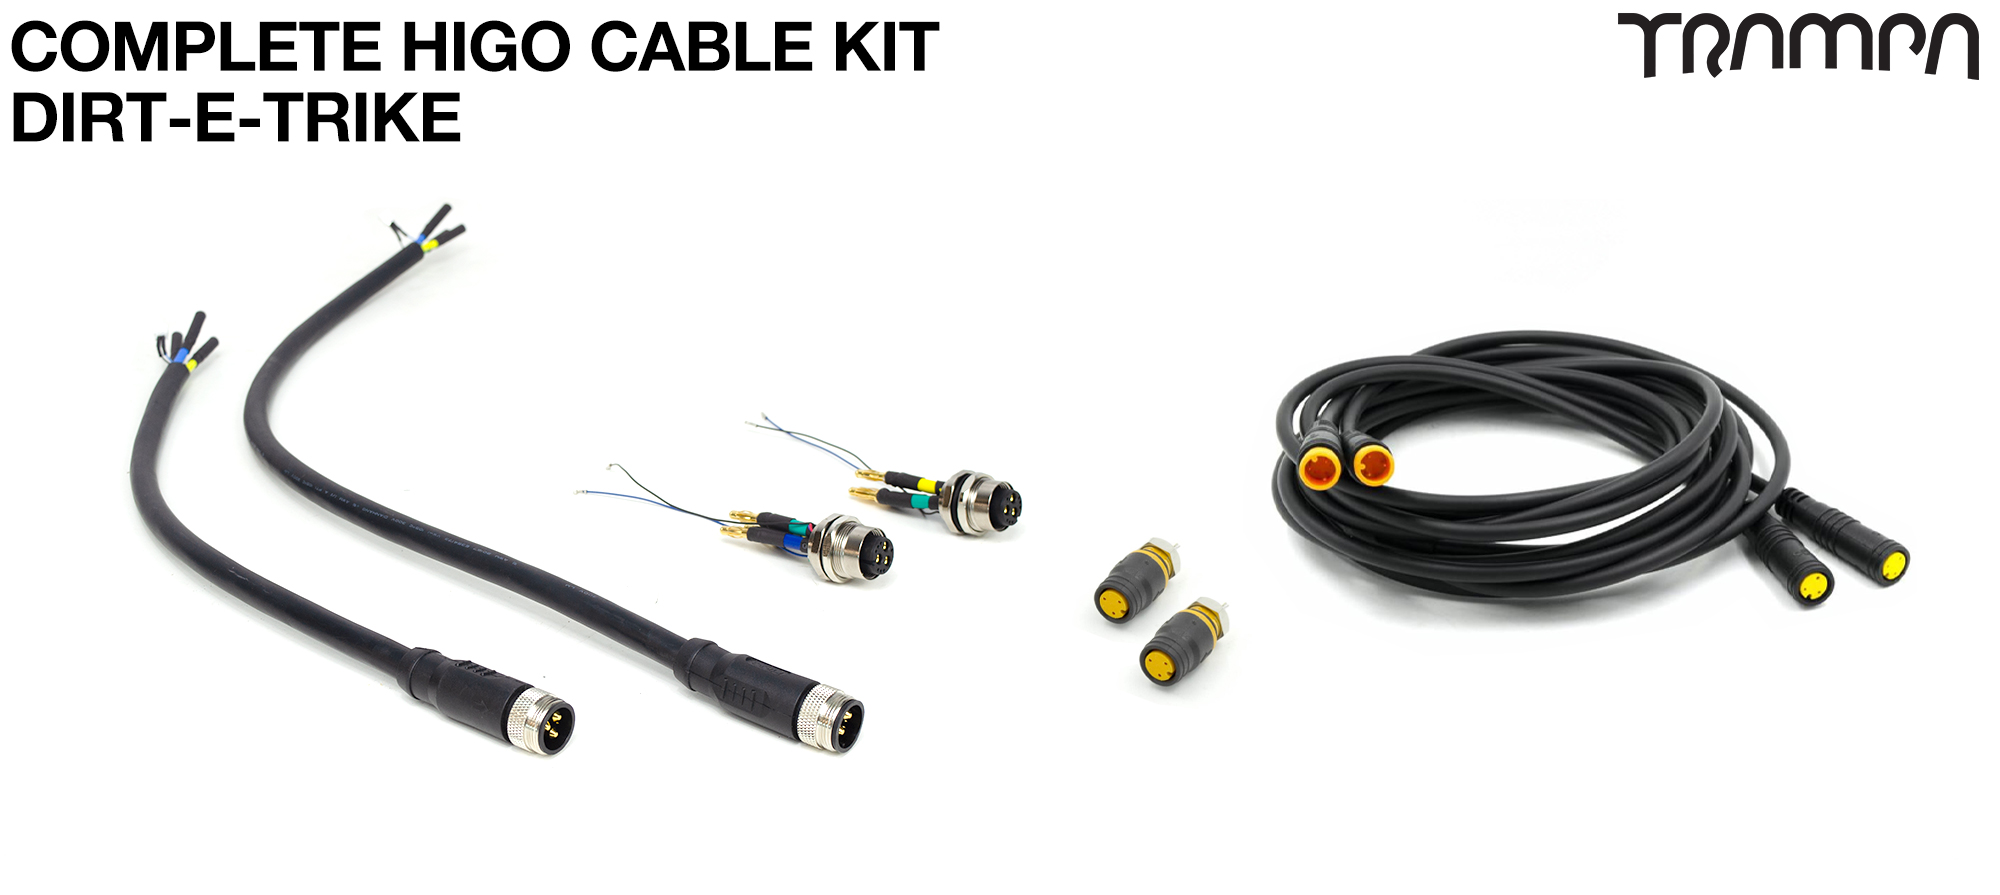 Complete Drift-E-Trike Cable Kit for TWIN VESC 6 with 50 Amp Fuse all soldered & heat sealed ready for plug & play use & of course TRAMPA Stamped 1036 strand Silicon coated Cable!